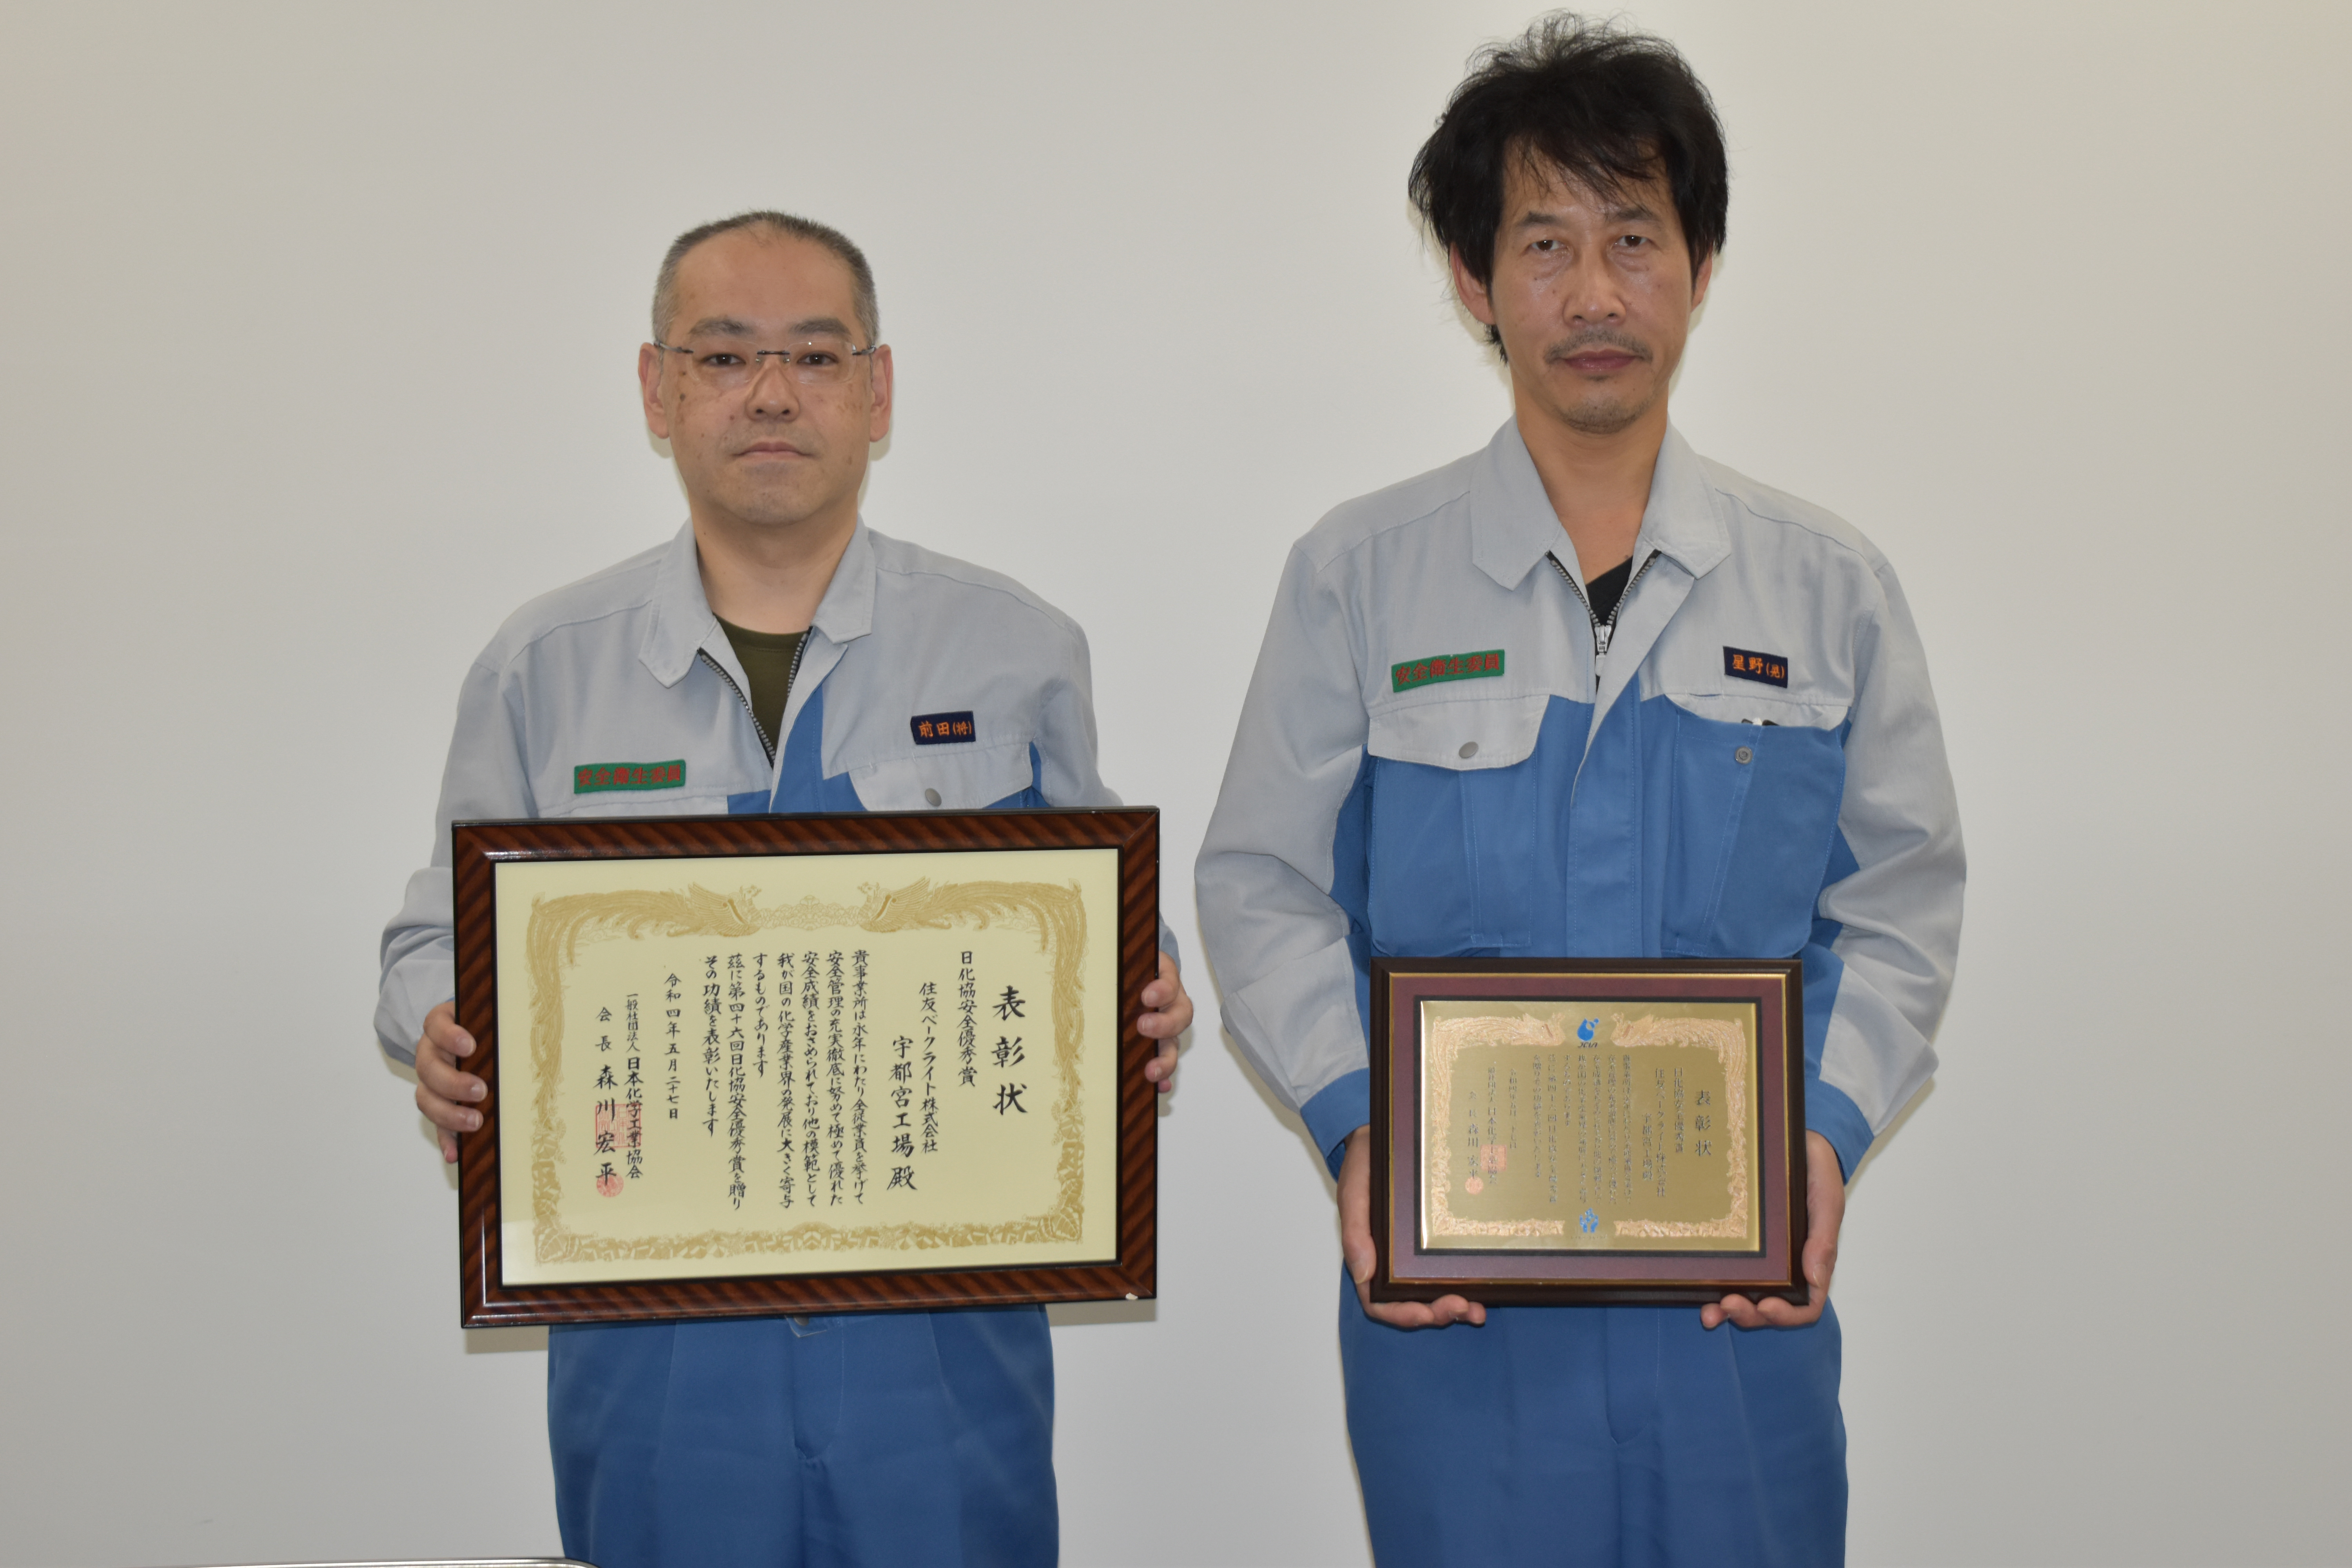 Receiving the Utsunomiya Plant
“Excellence in Safety” award